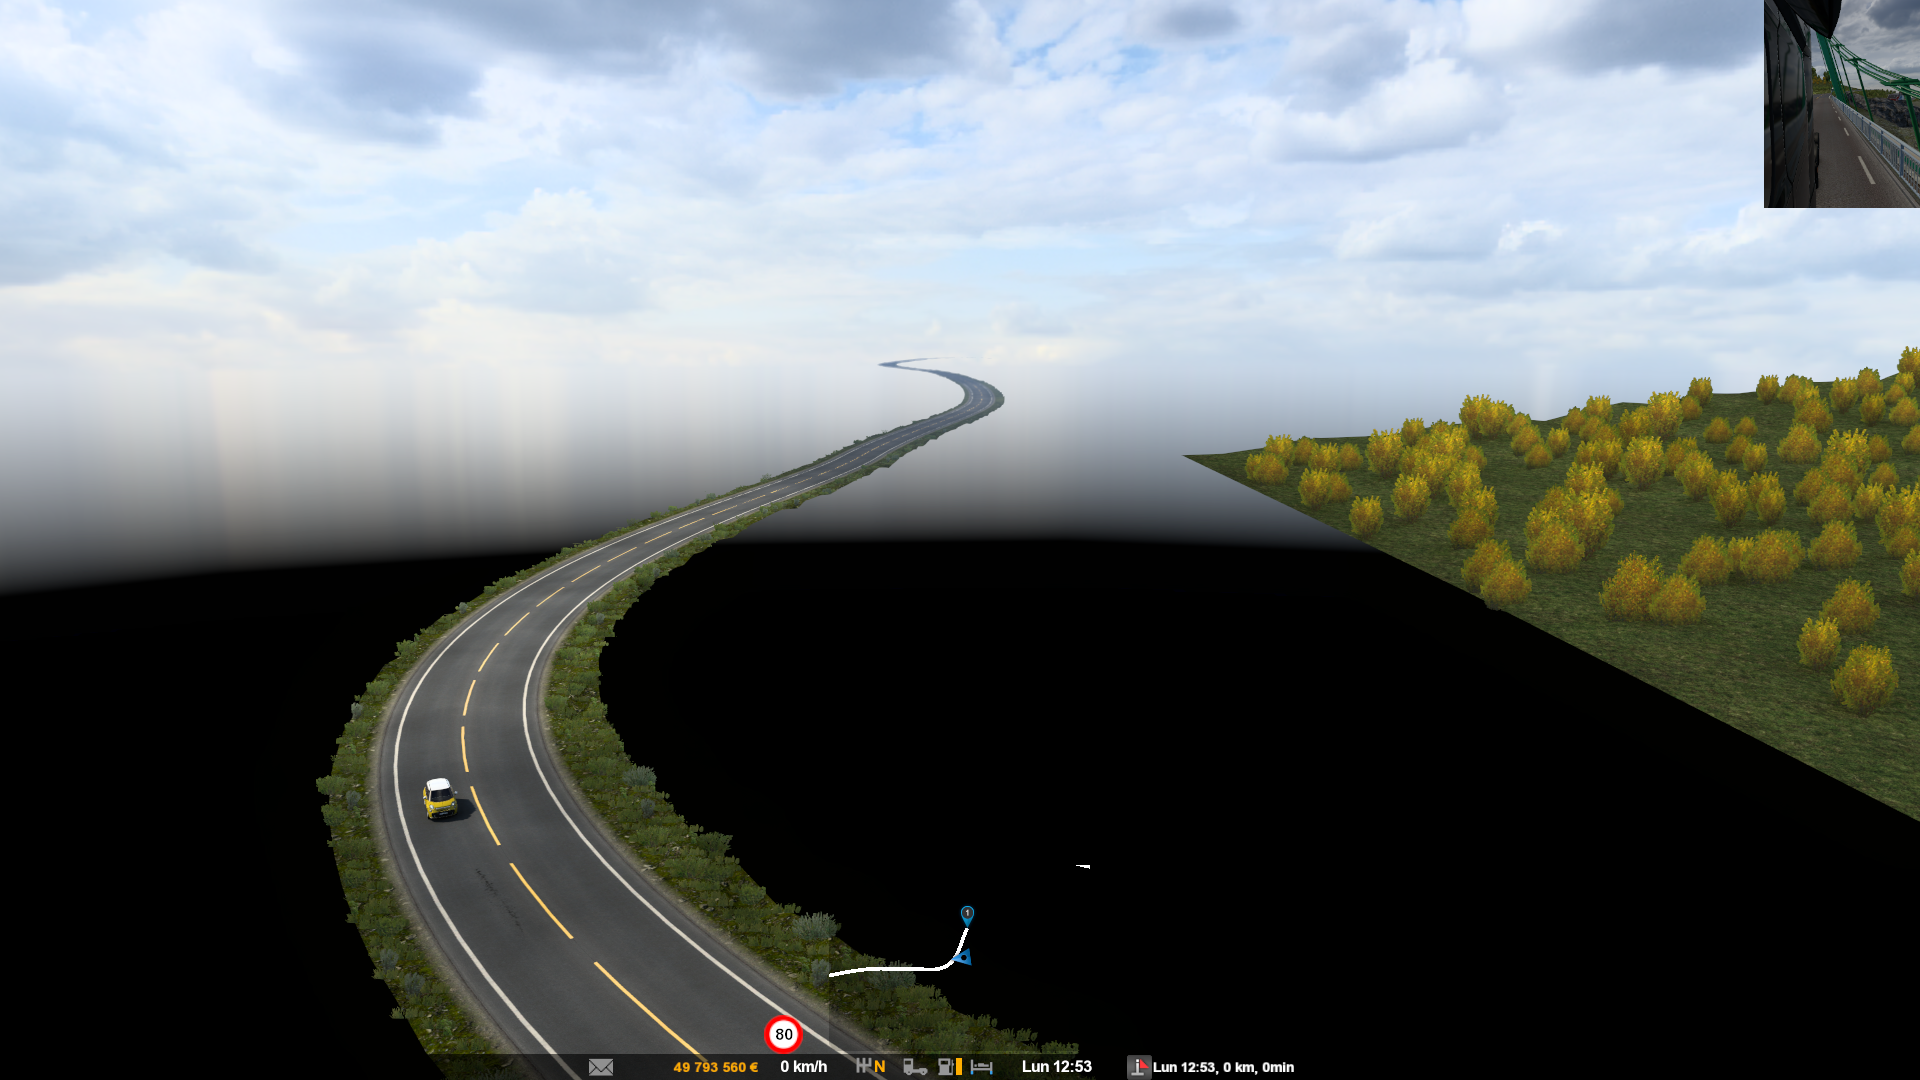 ets2_20210402_005943_00.png